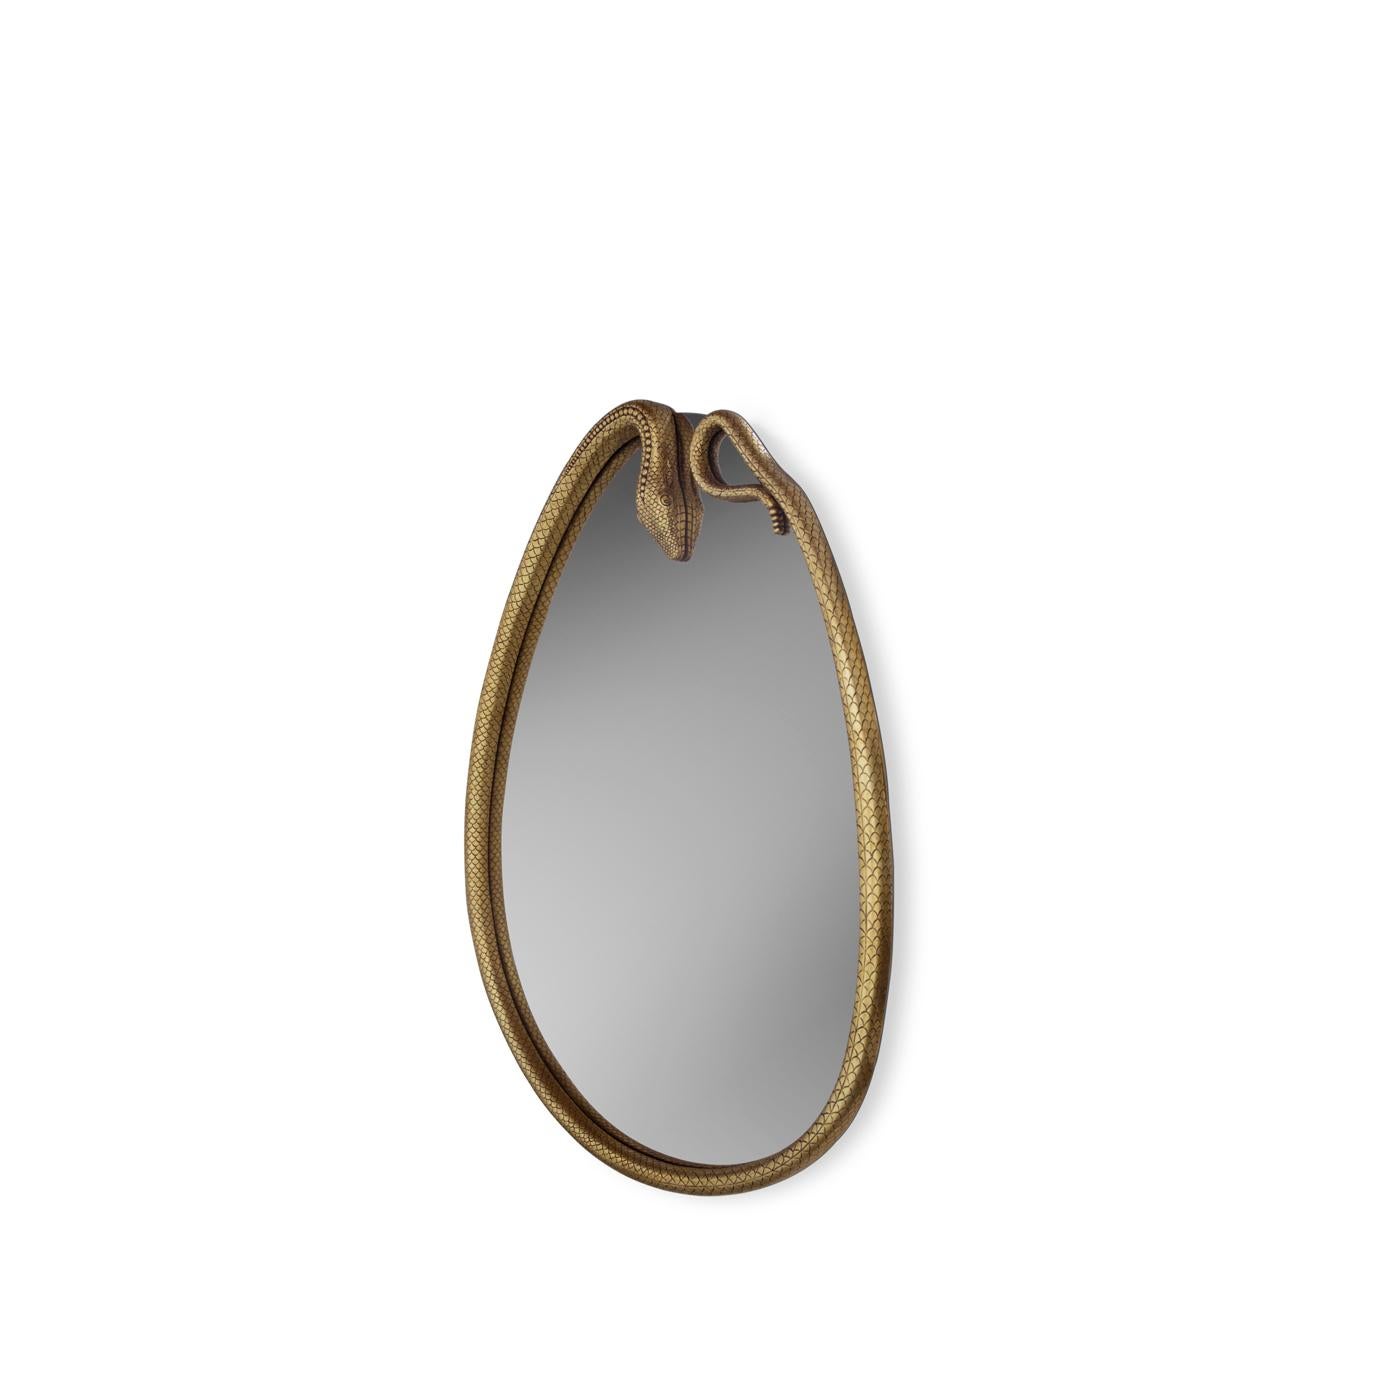 Be transformed as you gaze into the Serpentine's pear-shaped mirror. Framed in a coiled serpent form made of hand-carved wood, this mirror is the perfect way to add a touch of exoticism to any interior setting.